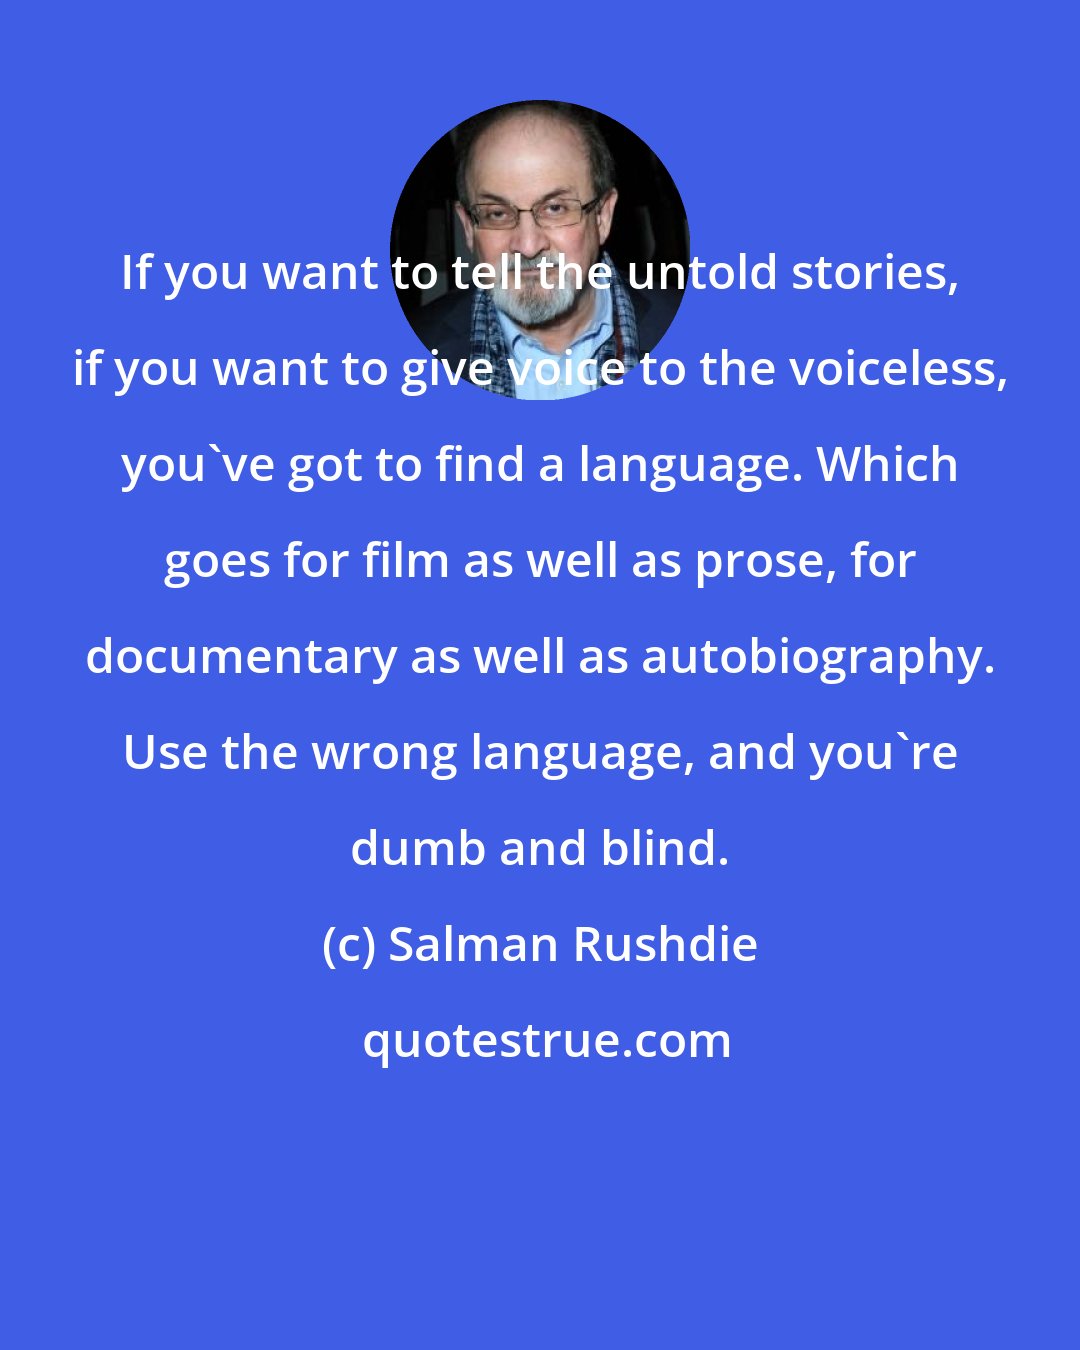 Salman Rushdie: If you want to tell the untold stories, if you want to give voice to the voiceless, you've got to find a language. Which goes for film as well as prose, for documentary as well as autobiography. Use the wrong language, and you're dumb and blind.